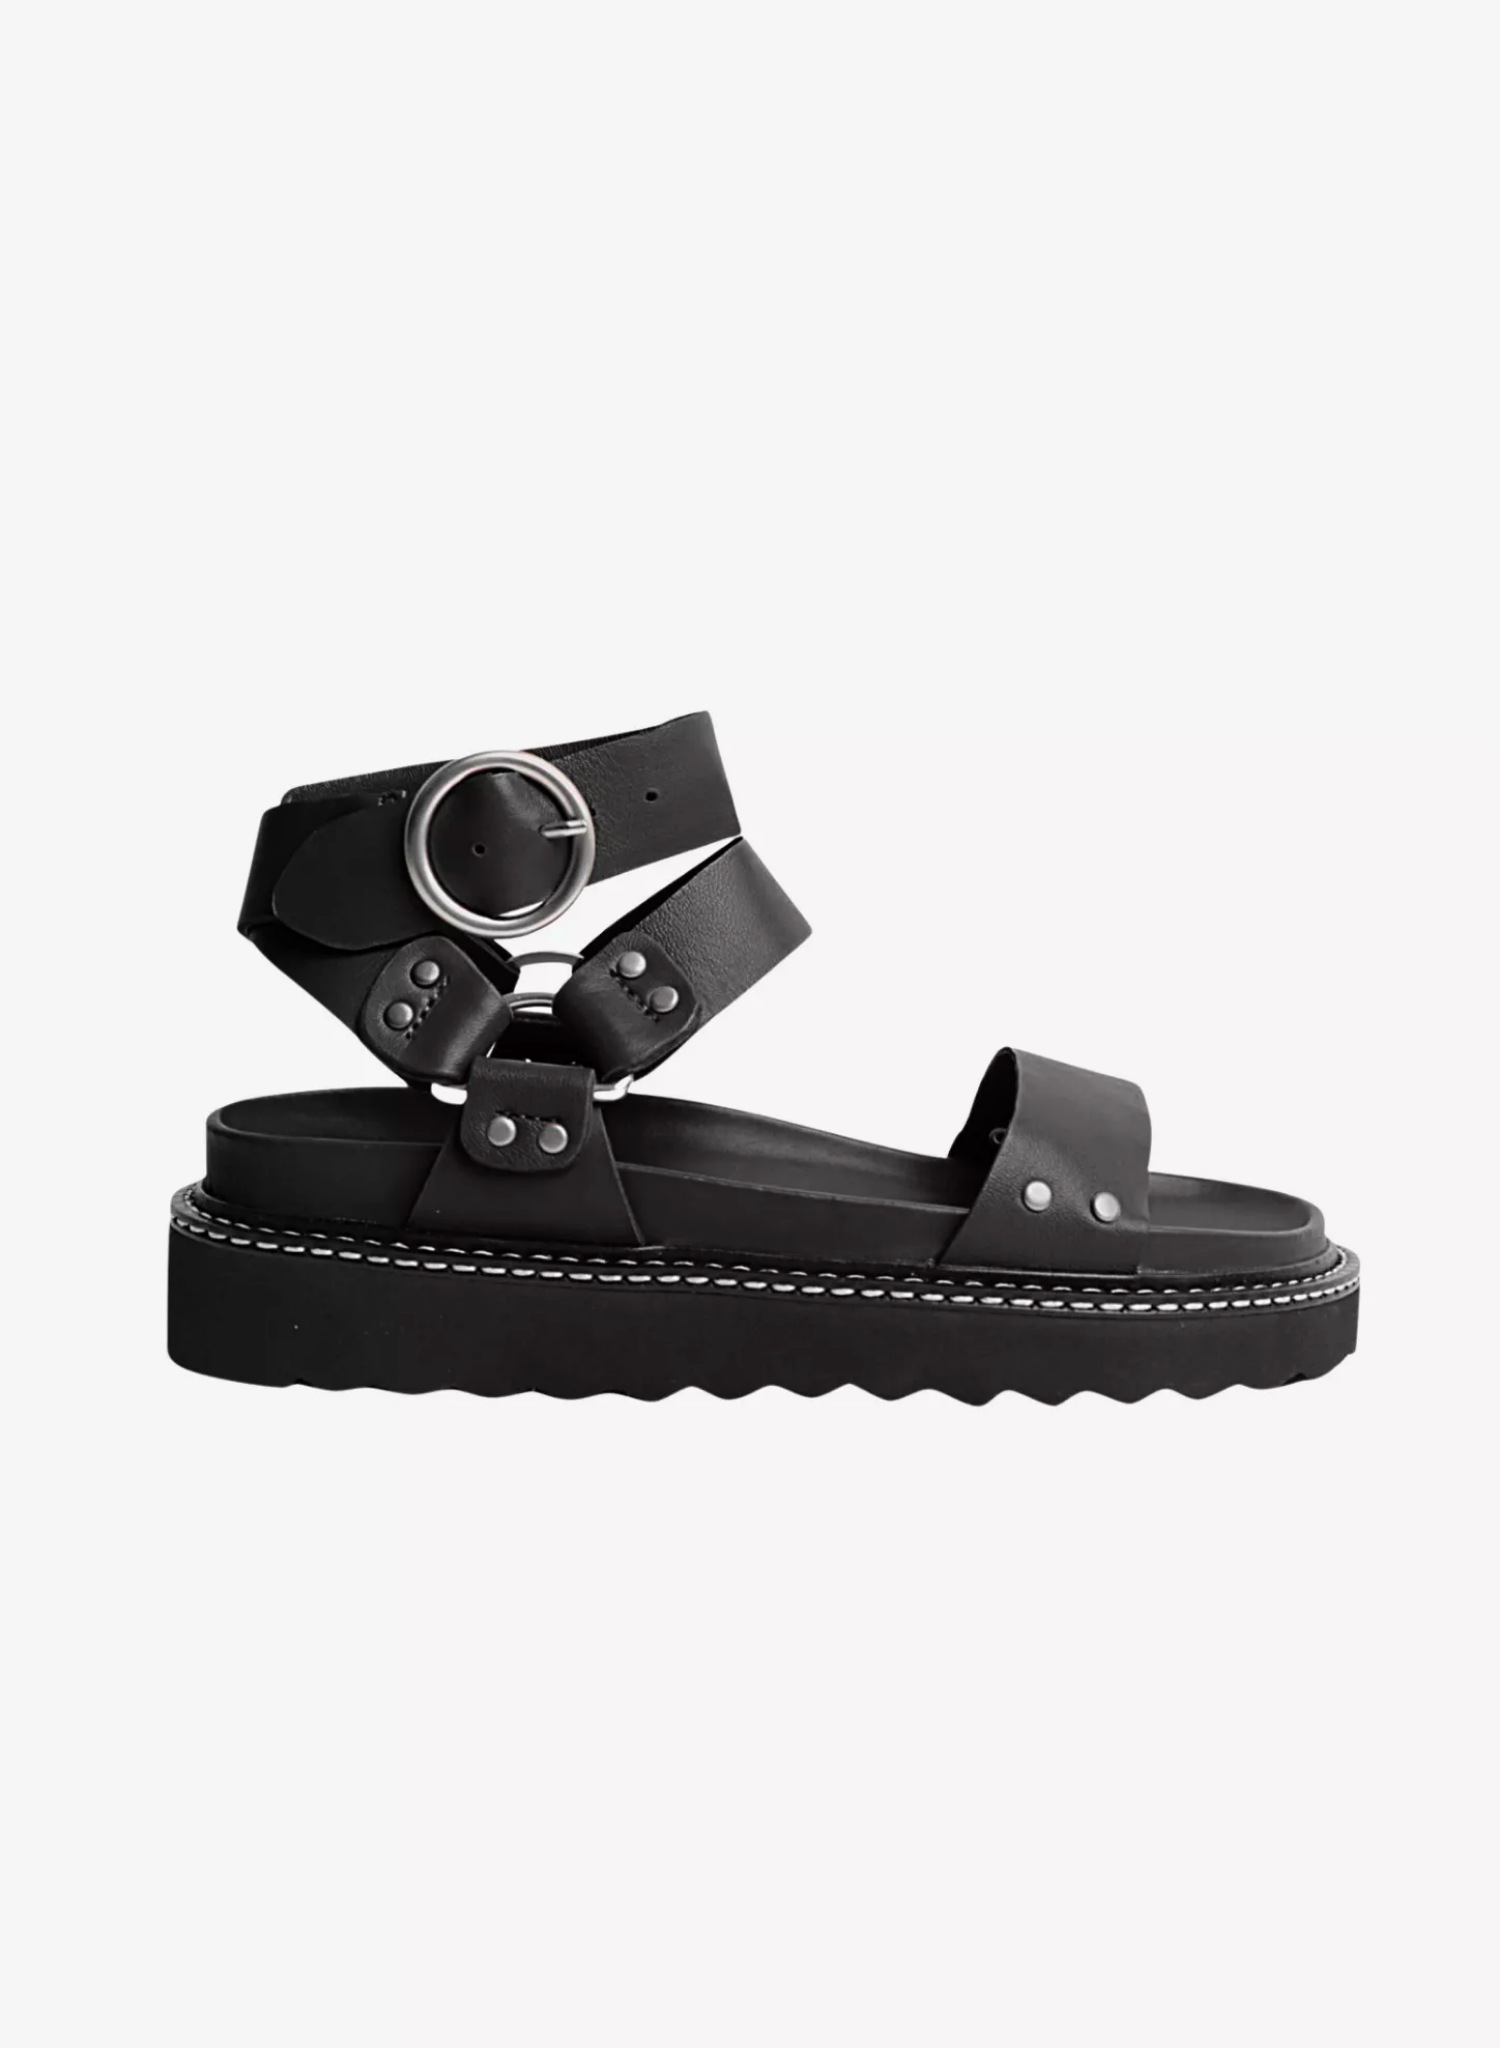 Chucky rubber sole Ankle wrap strap Adjustable buckle closure Matt Silver coloured hardware Upper/Lining:100% Leather Sole: Rubber